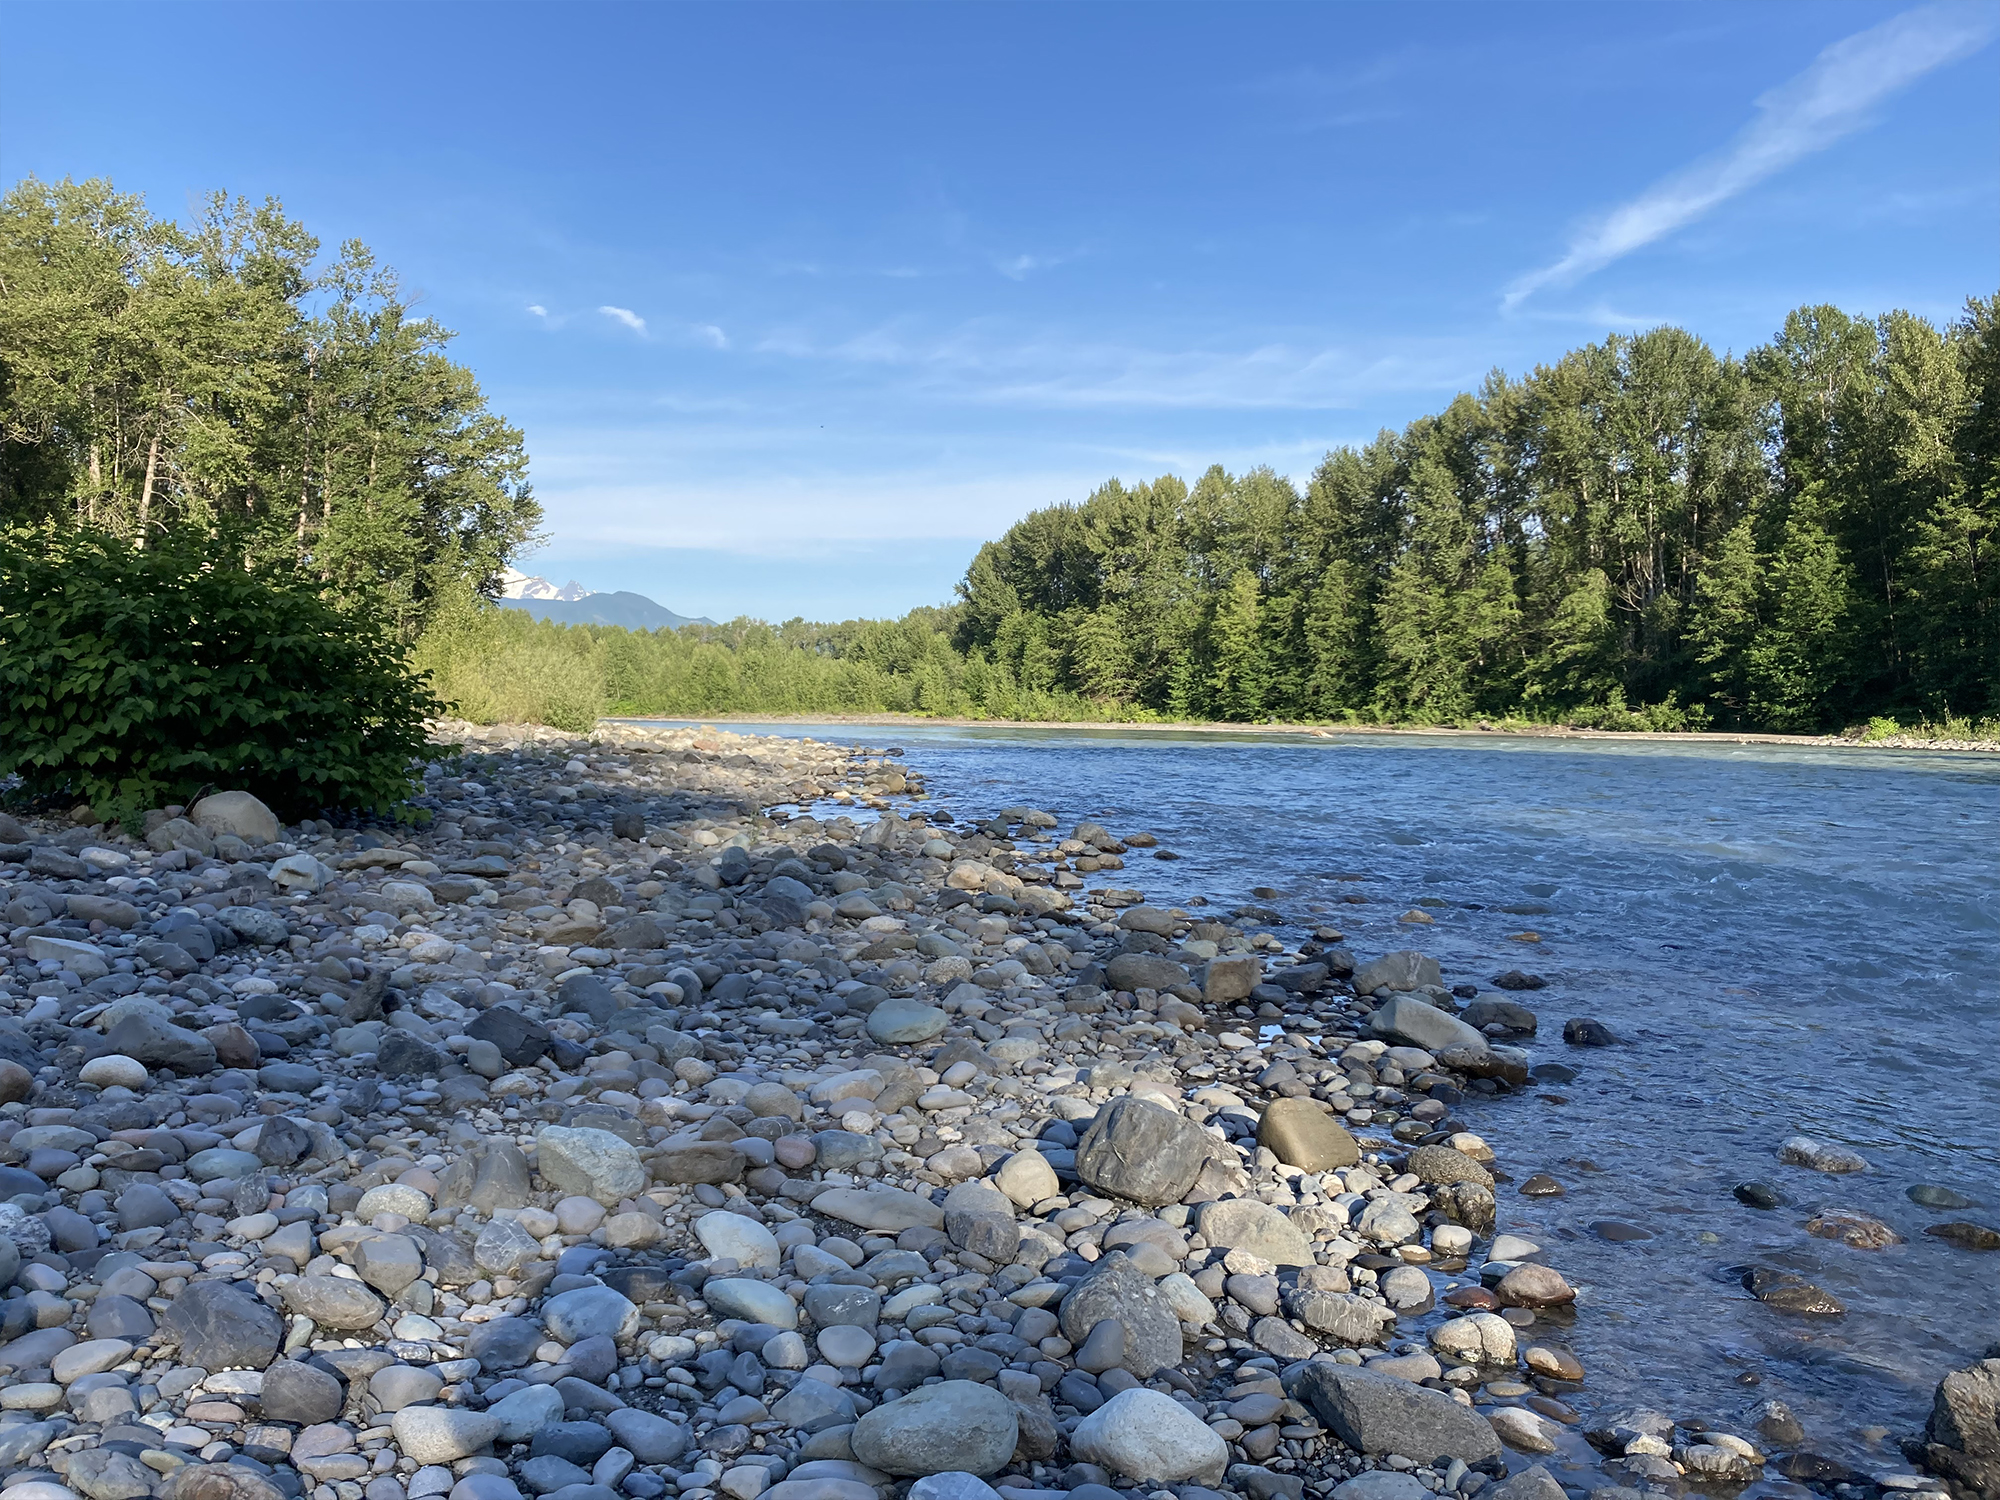 Nooksack river flowing past forested and rocky shores